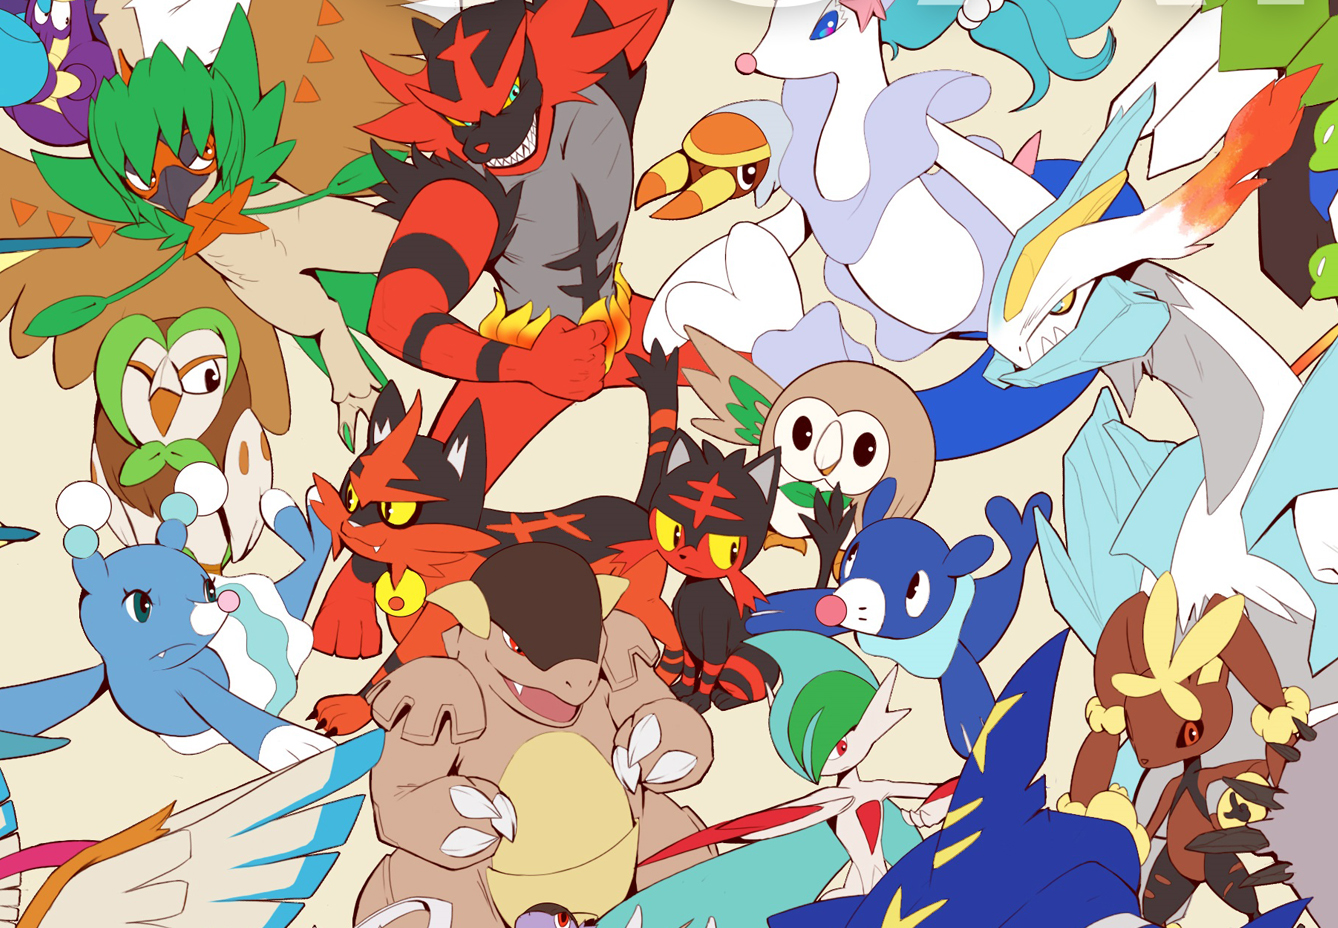 Watch A Man Spend 350 Hours Drawing All 807 Pokémon 